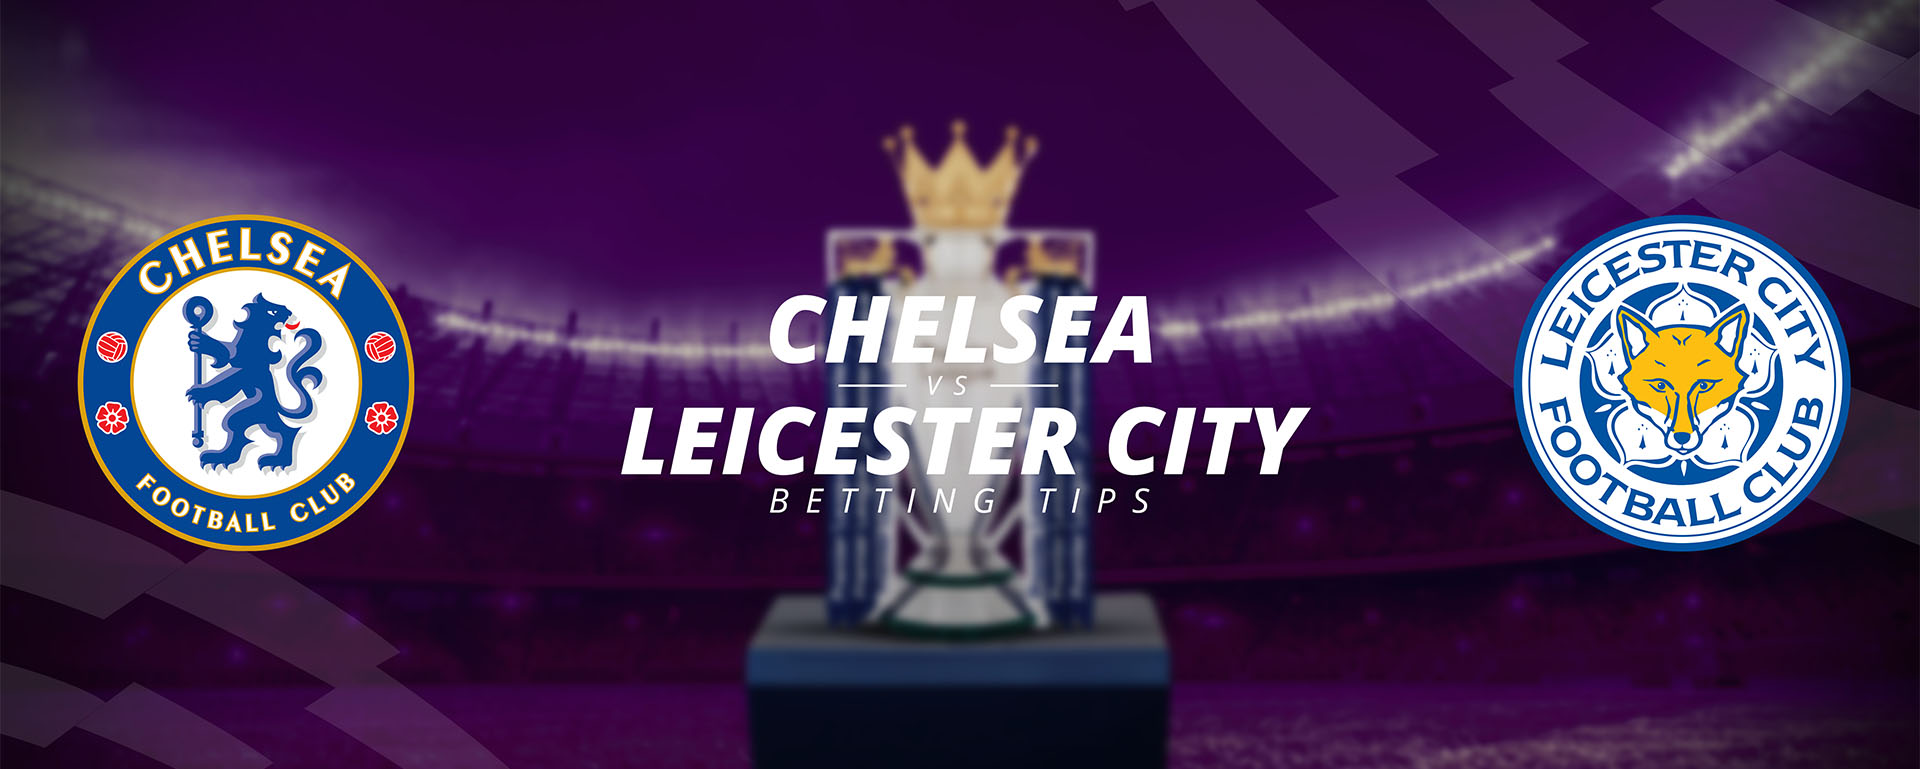 CHELSEA VS LEICESTER CITY: BETTING TIPS